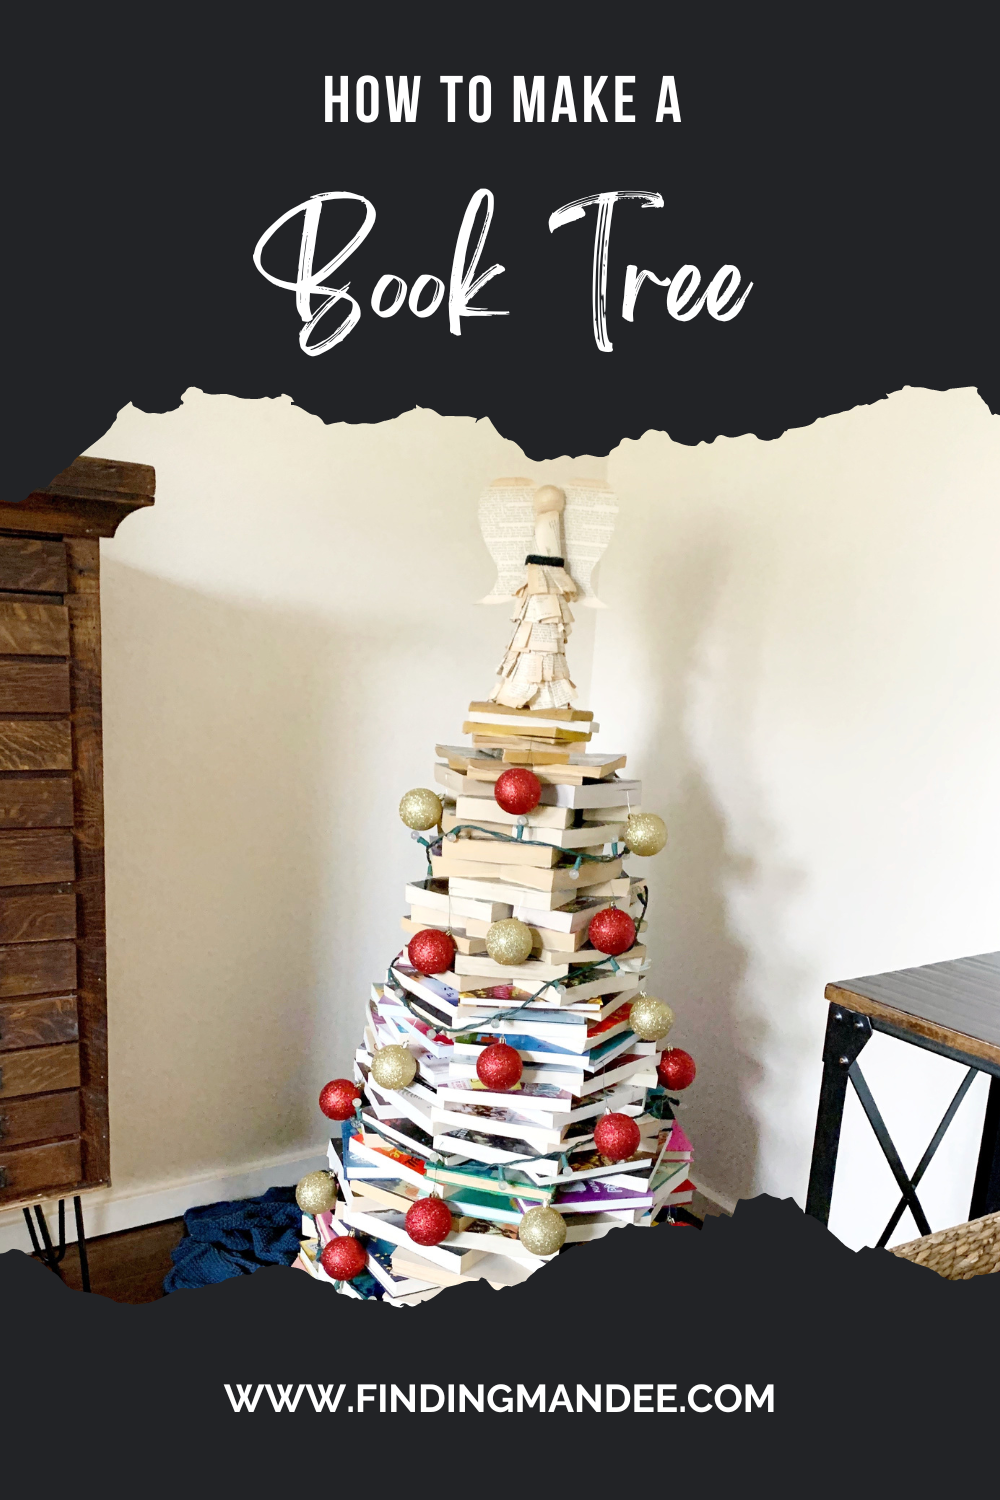 How to Make a Book Tree | Finding Mandee